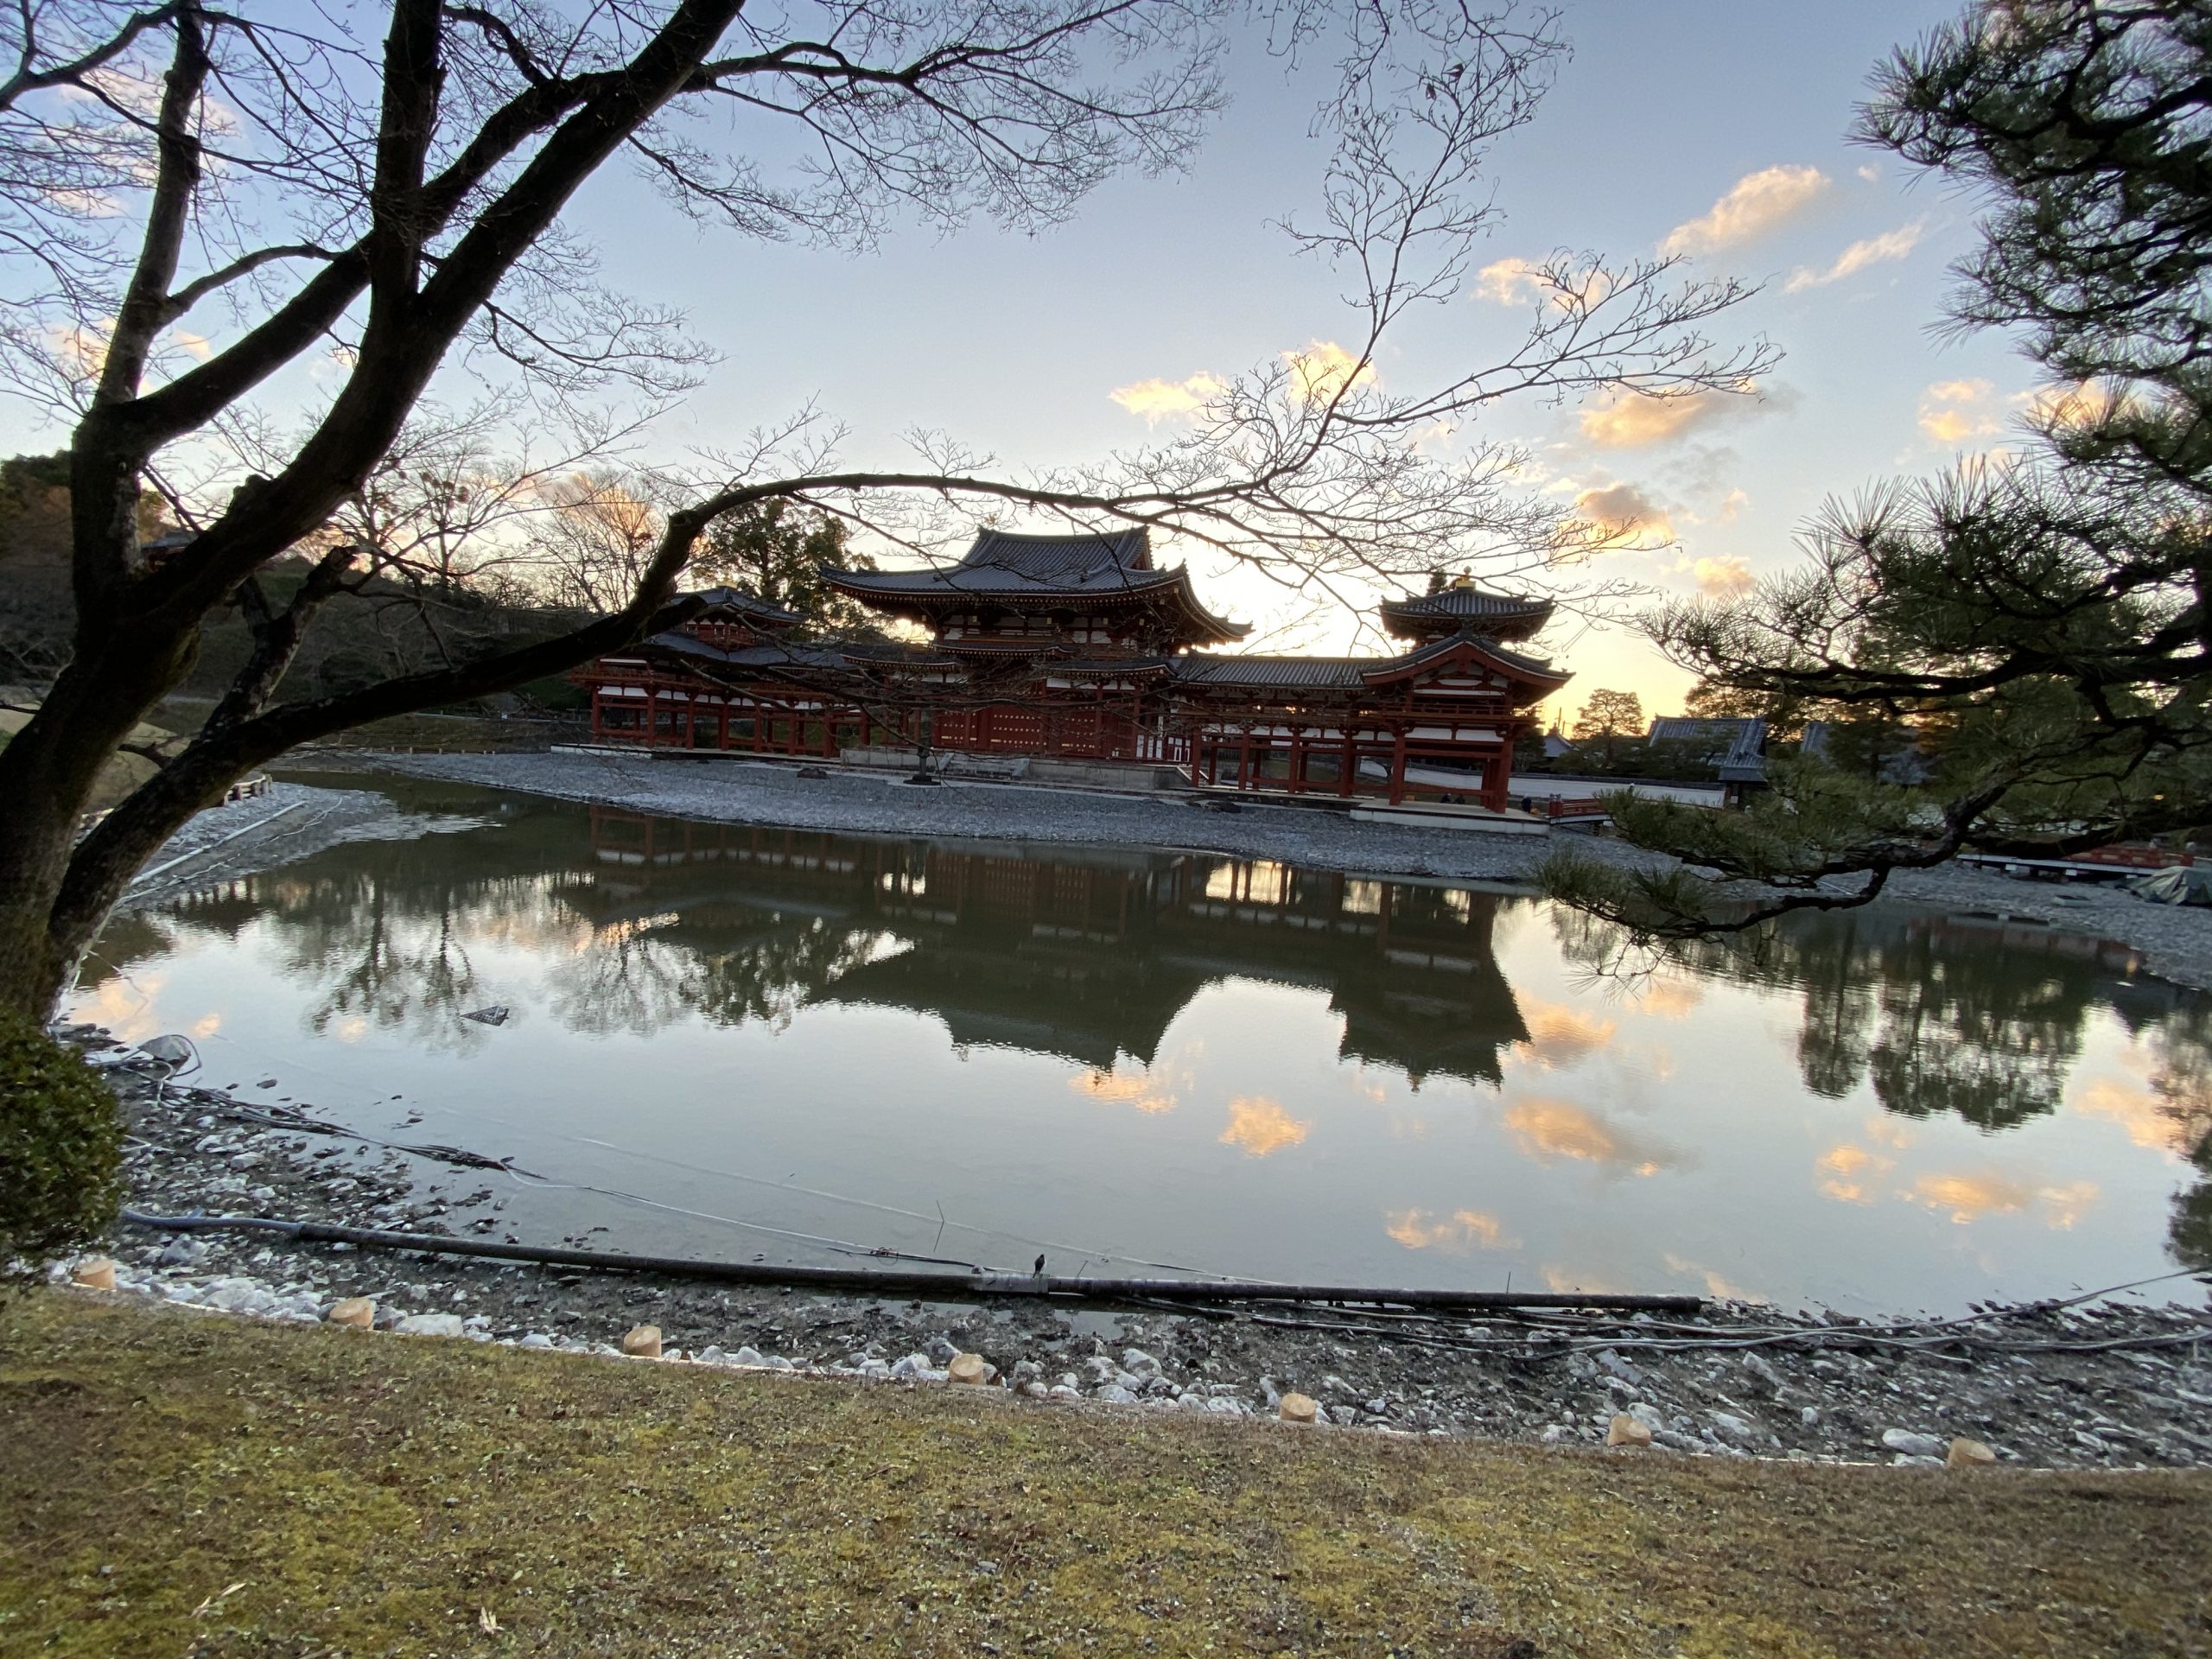 Byodoin, a red temple during the sunset